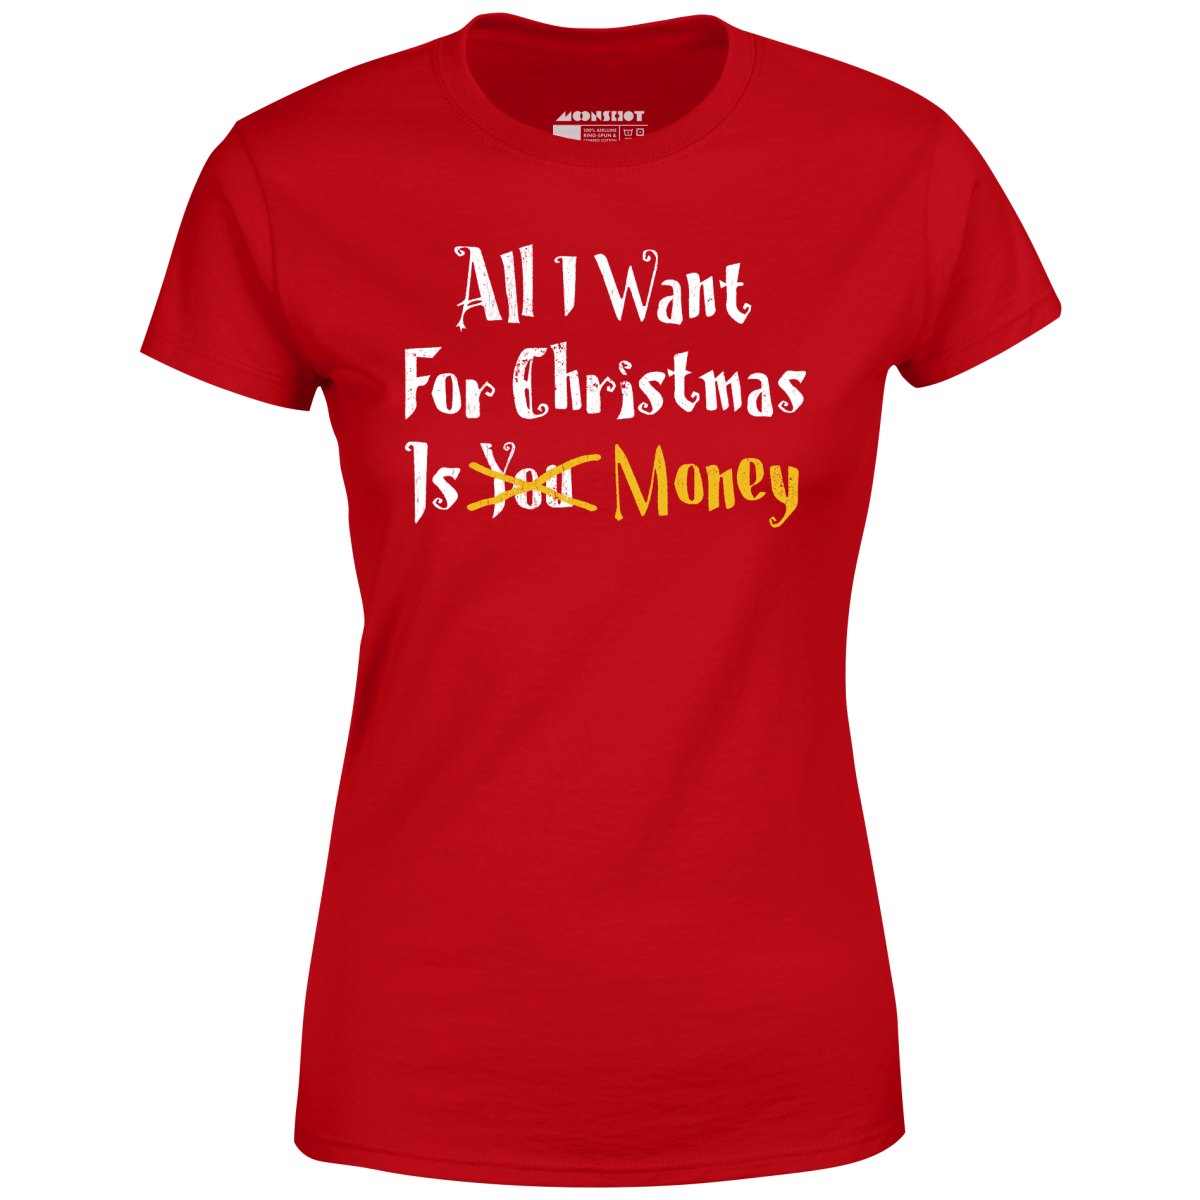 All I Want for Christmas is Money - Women's T-Shirt